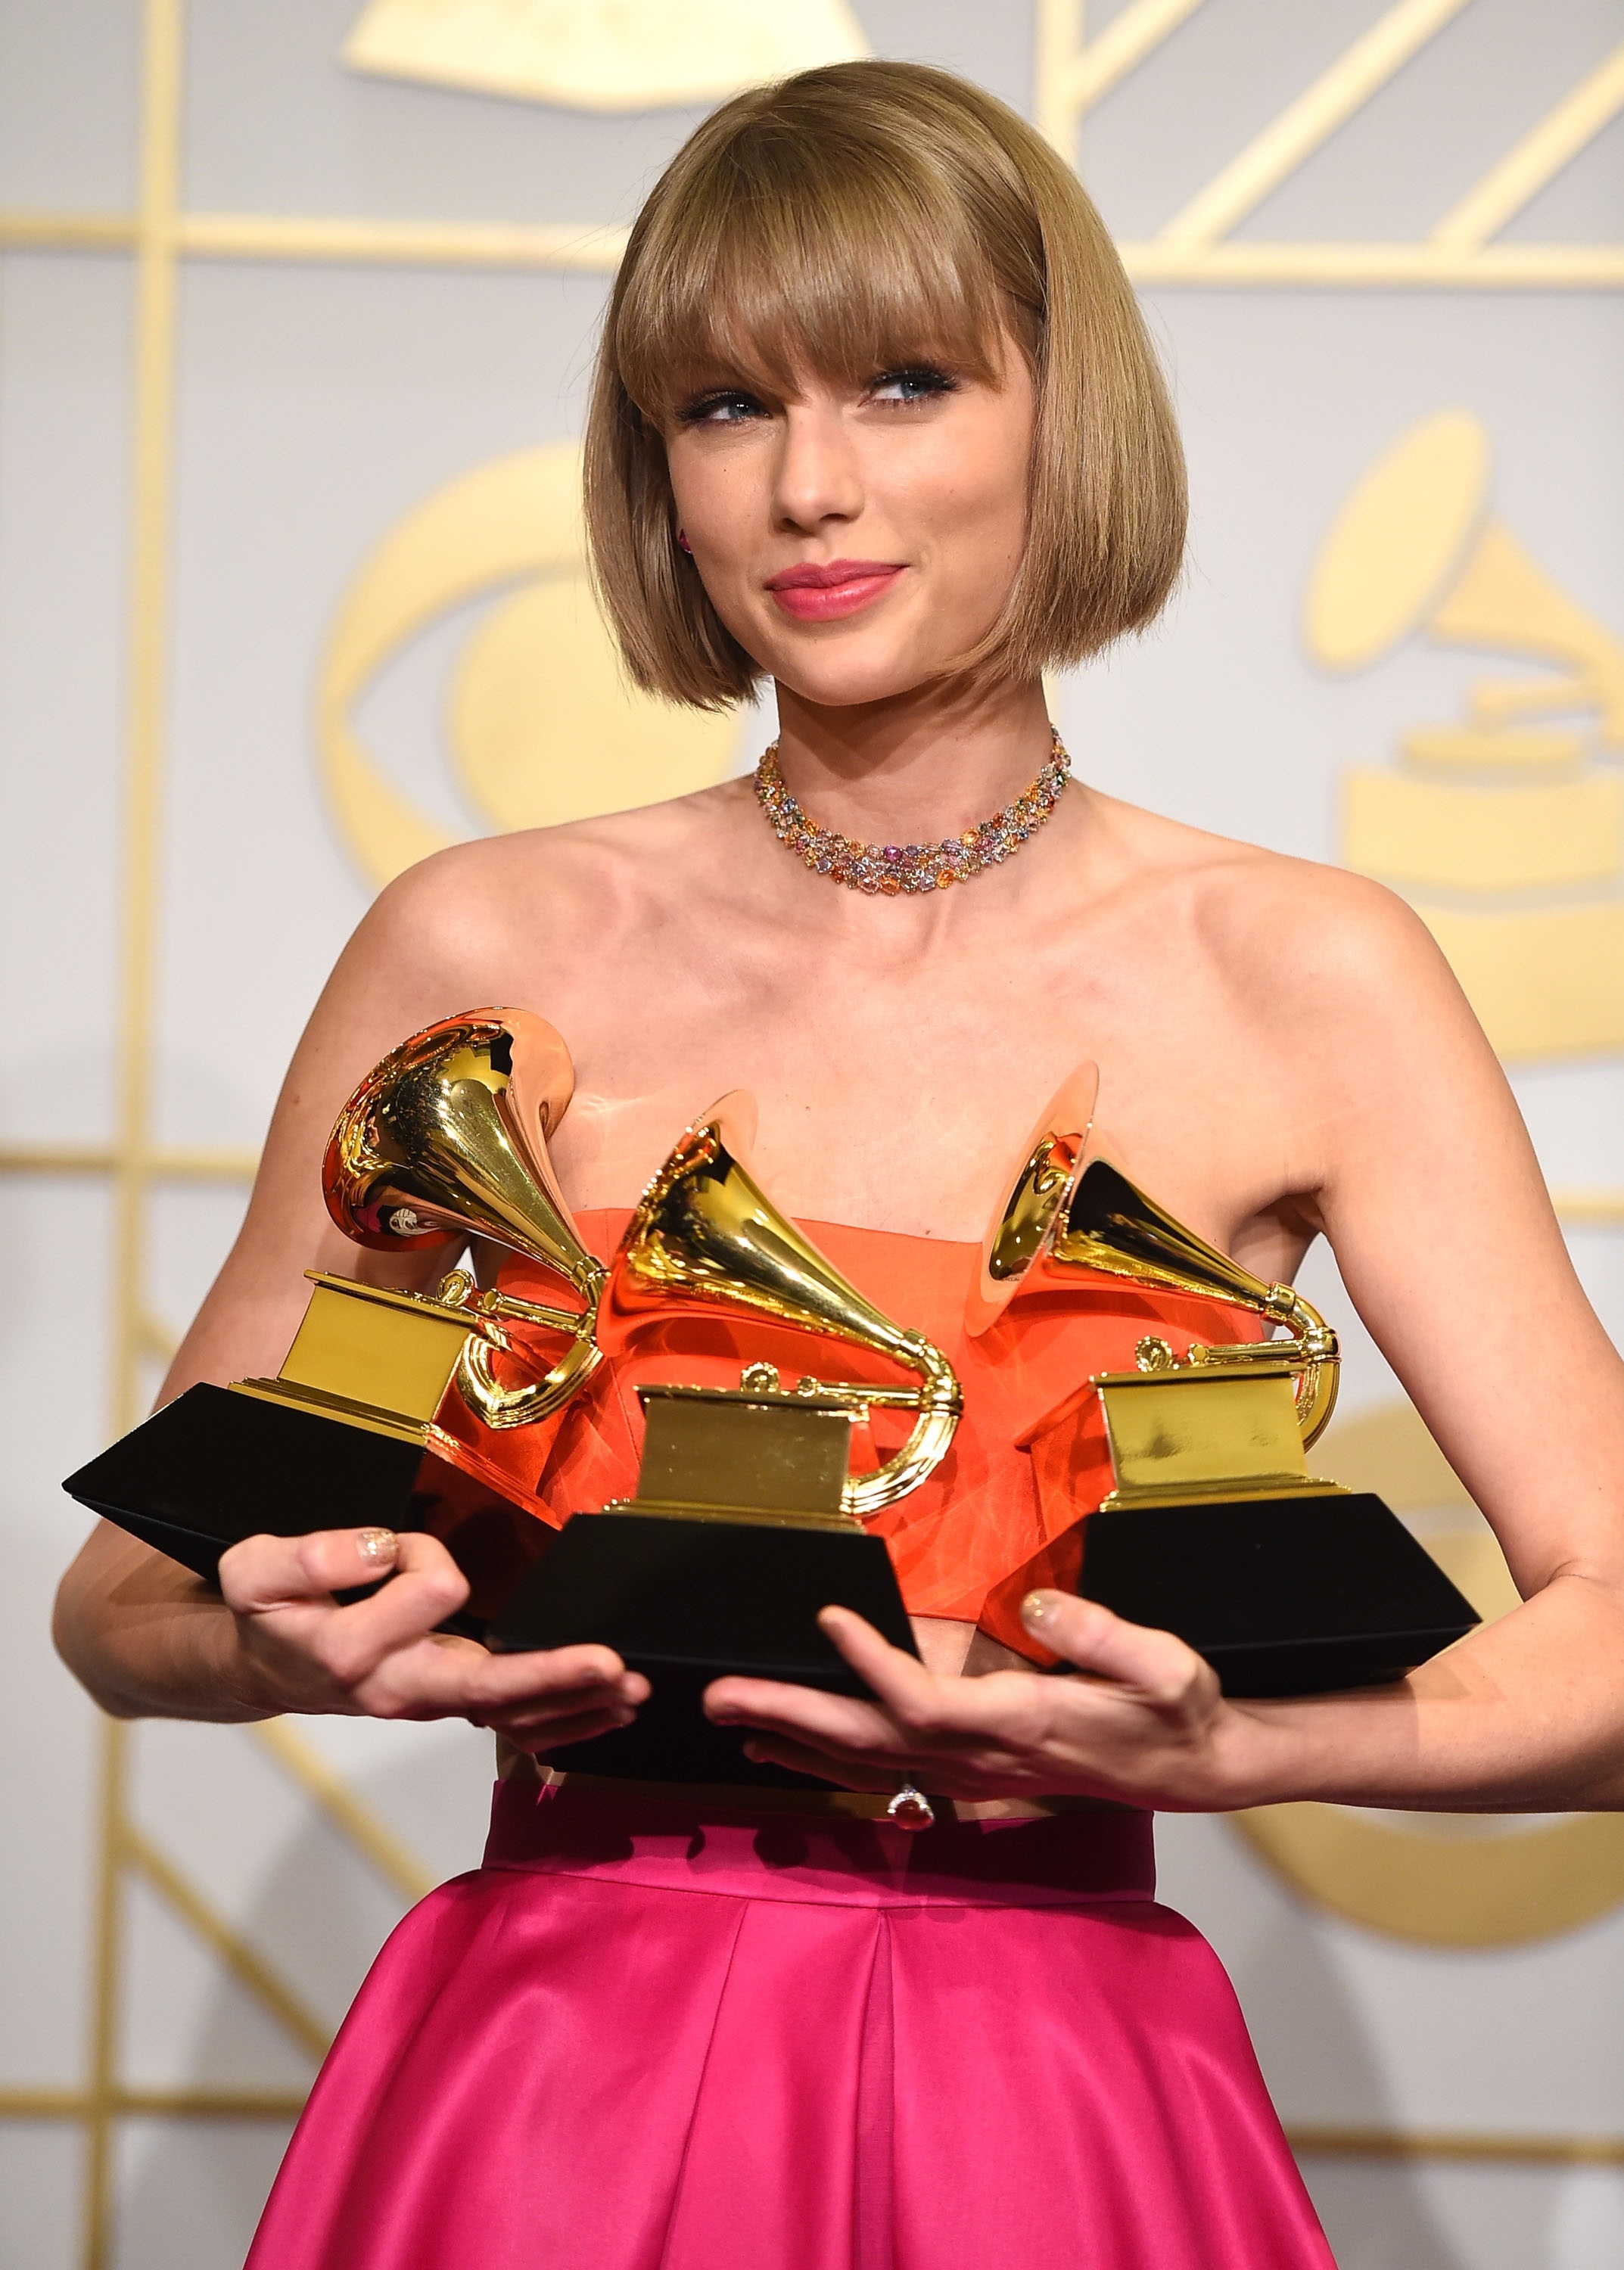 Getty Images/GRAMMY®, GRAMMYs®, GRAMMY Awards®, and the gramophone logo are registered trademarks of The Recording Academy® 